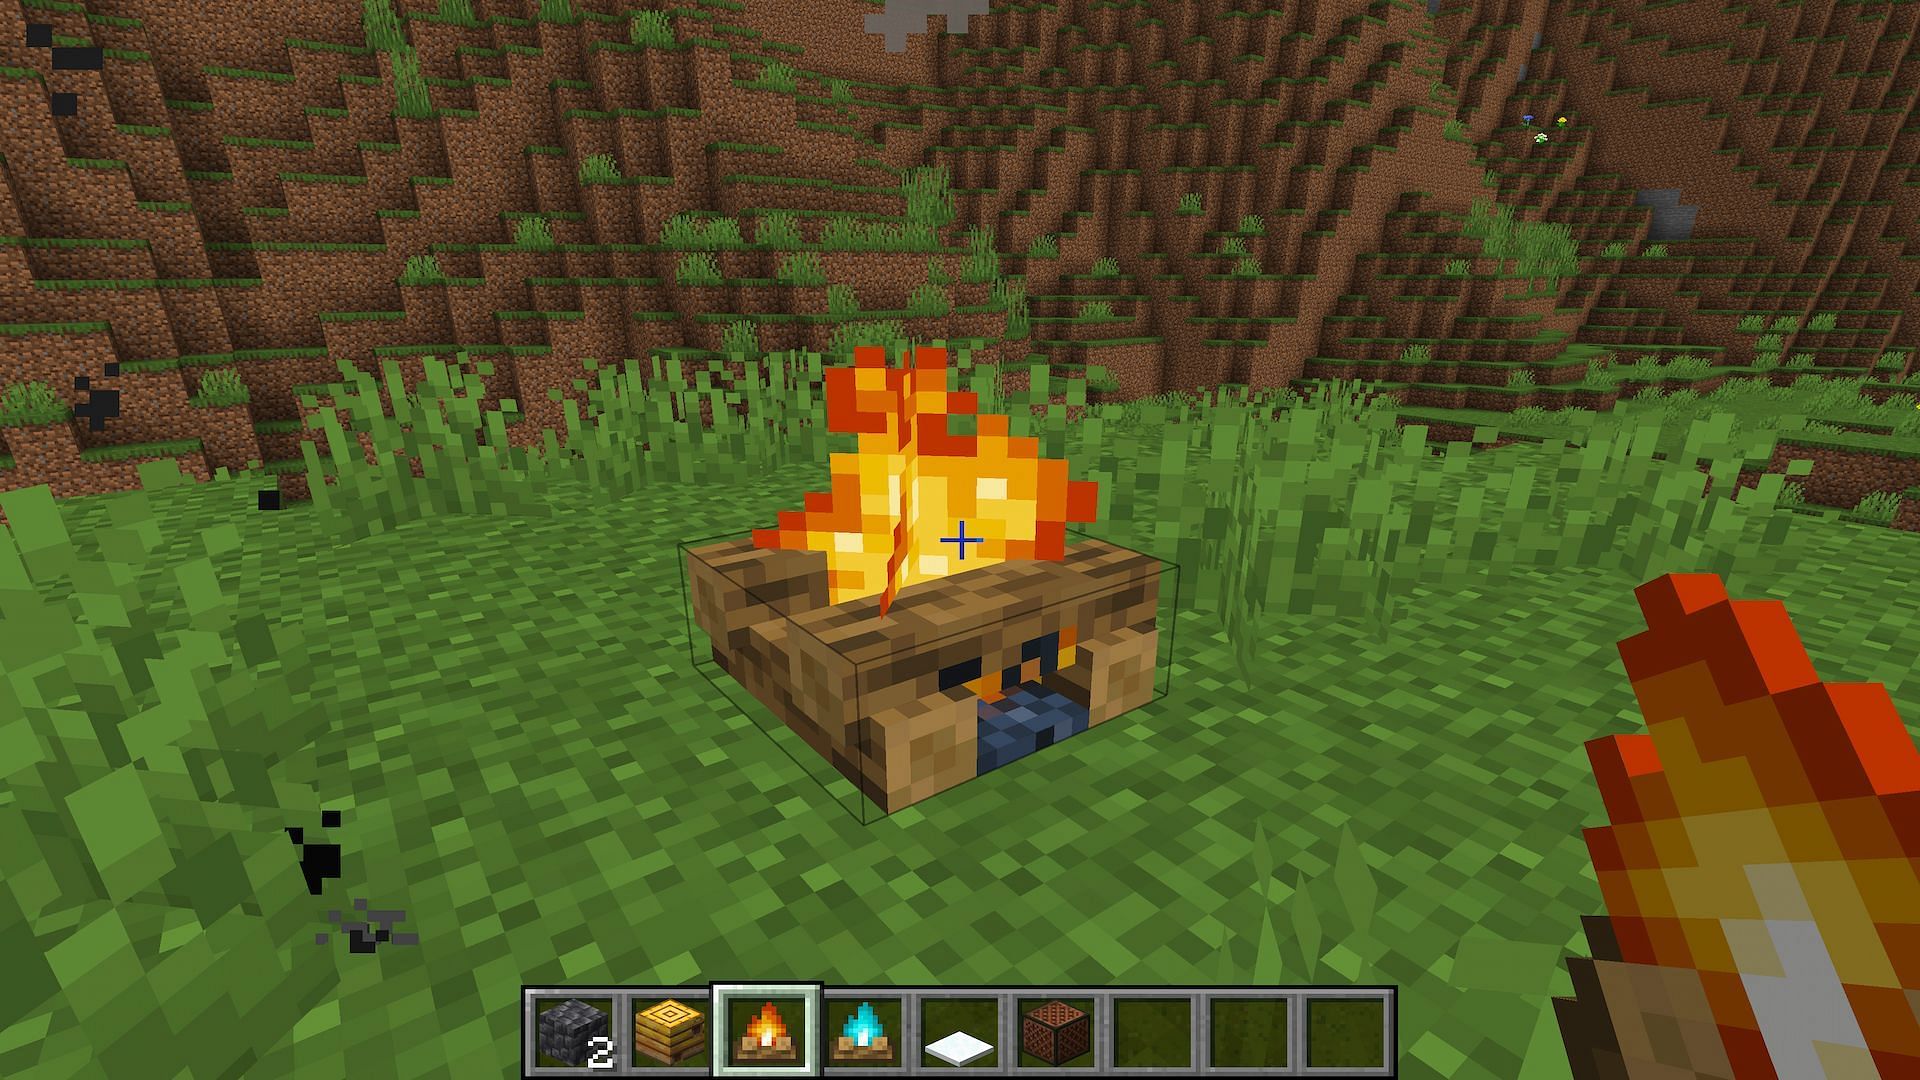 Players can use campfires for many different purposes in Minecraft, including cooking and light (Image via Minecraft)